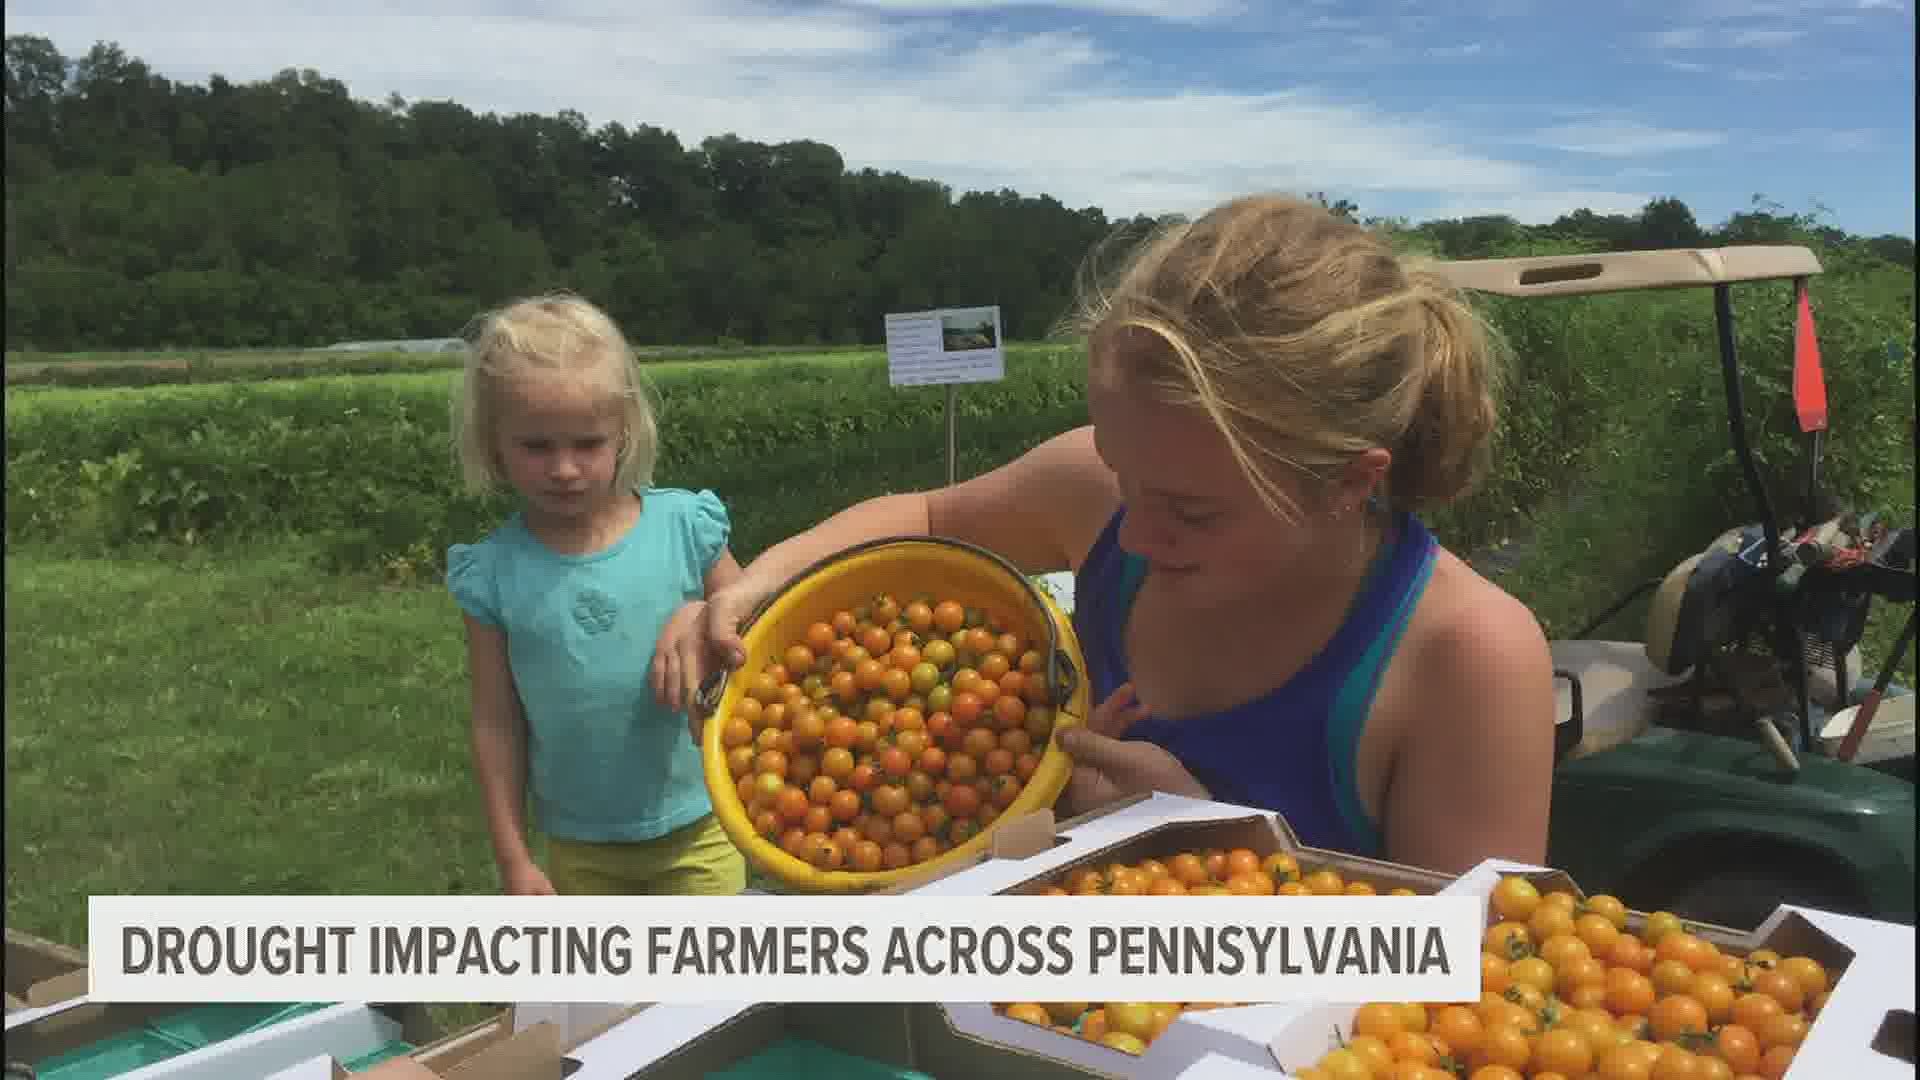 A warm and dry summer is to blame for crop damage and failure scattered across farms in Pennsylvania.